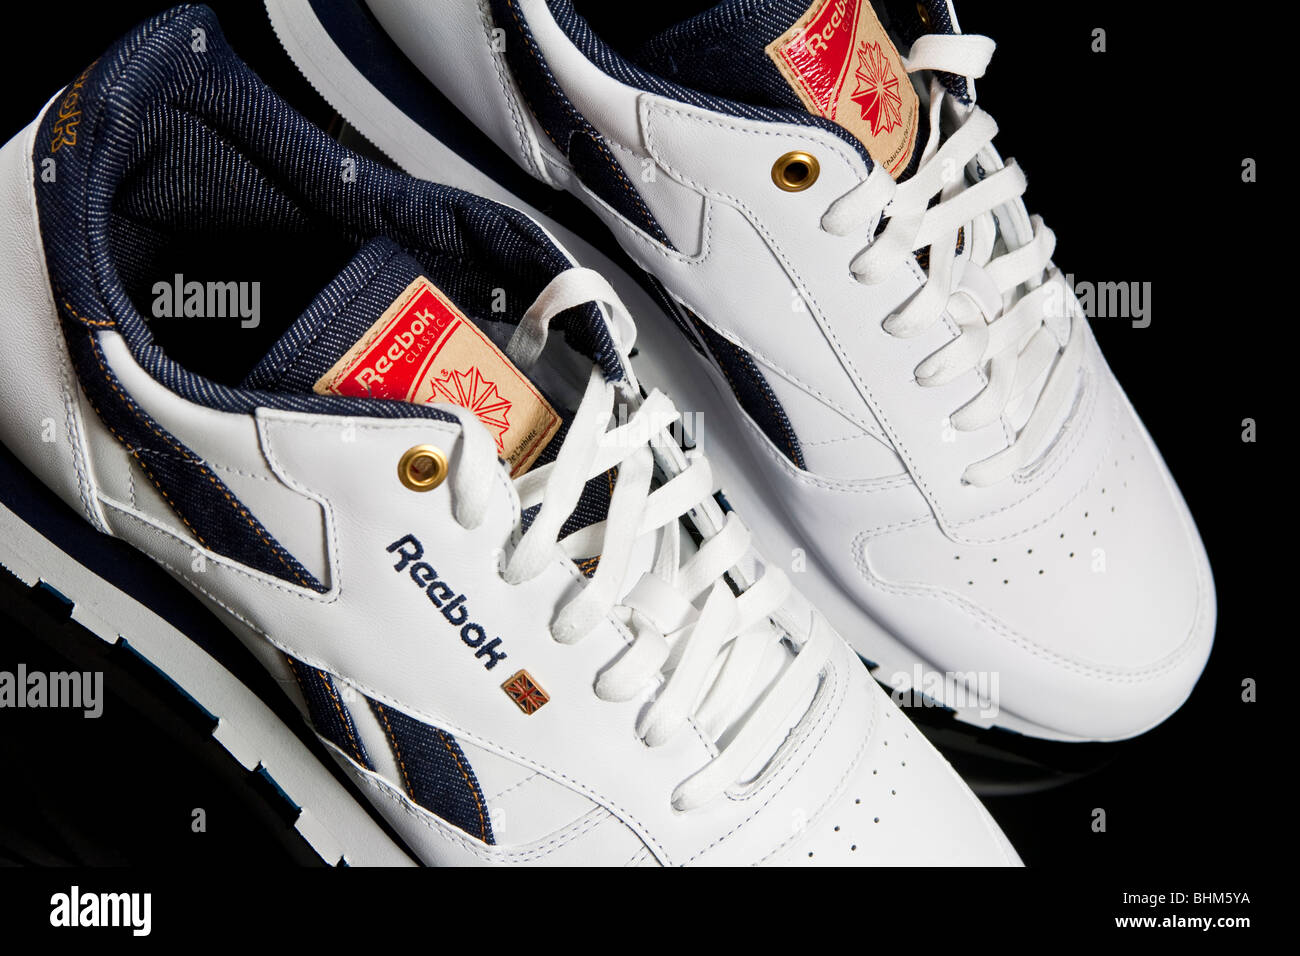 A pair of brand new Reebok training shoes Stock Photo - Alamy